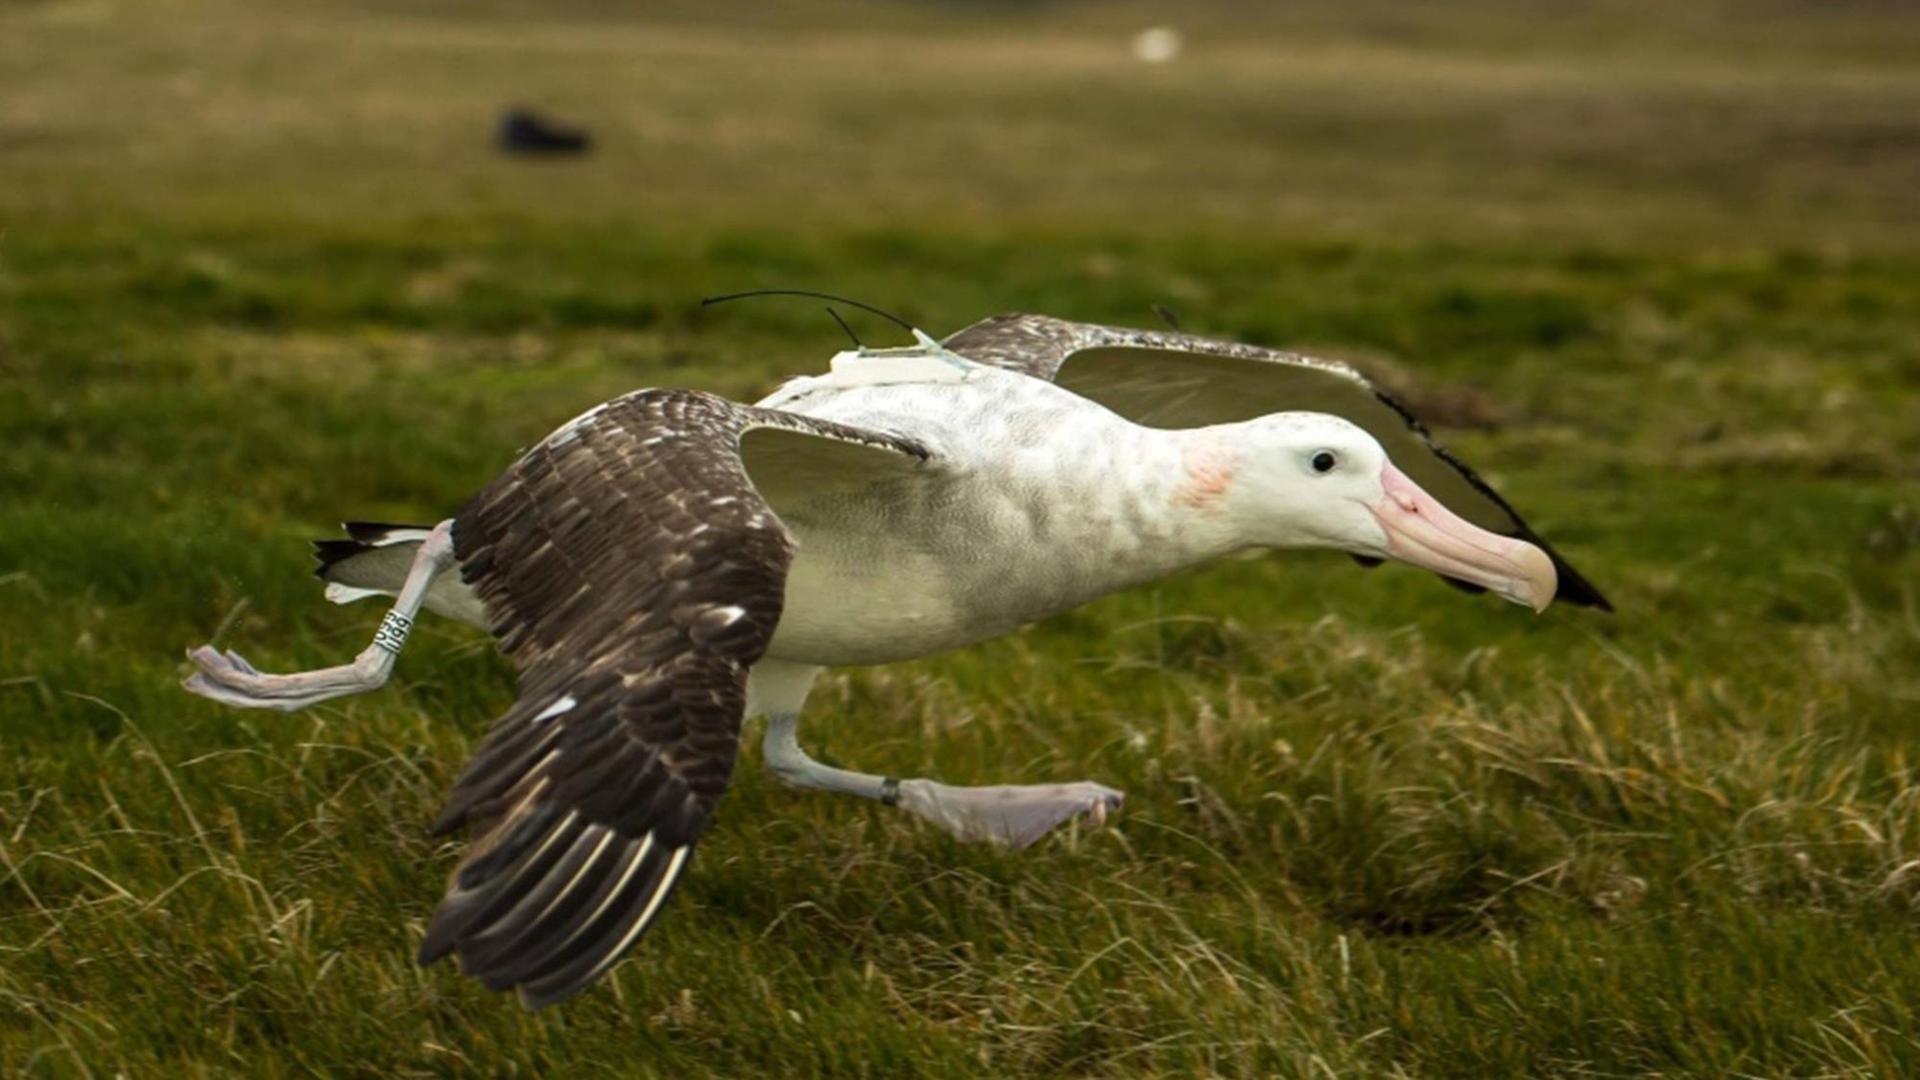 Wandering albatross taking off for the sea with a Centurion tag.